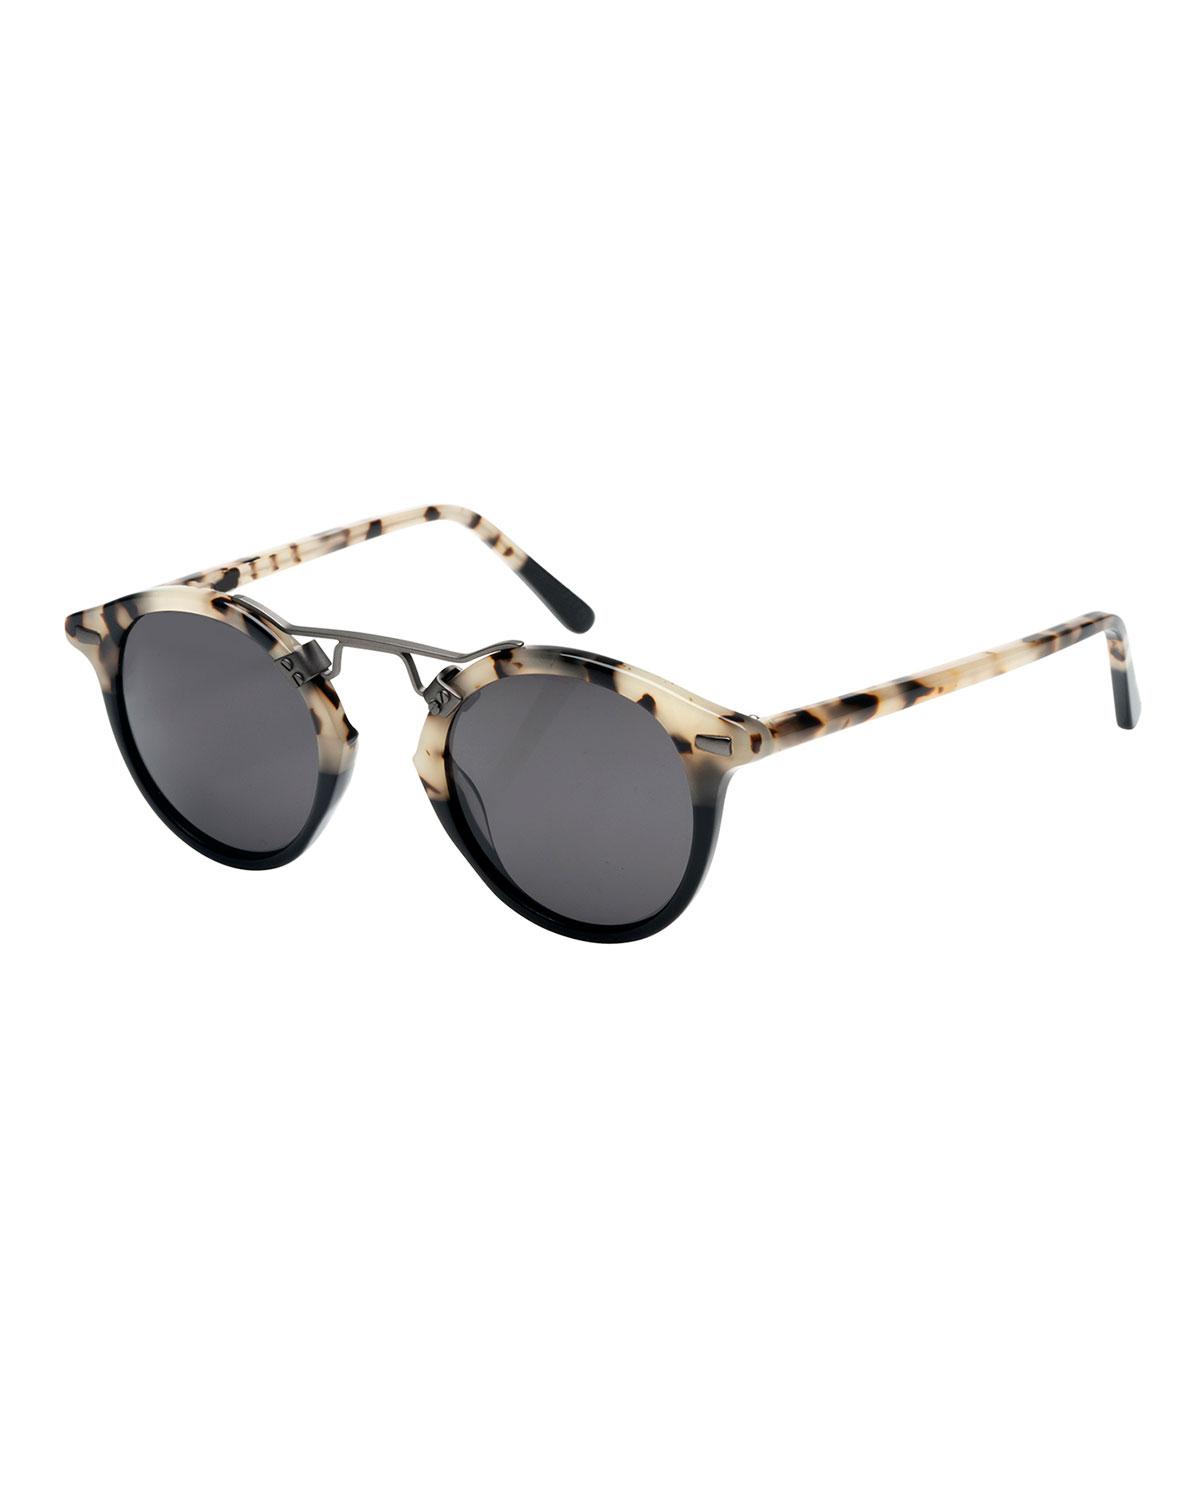 Krewe St. Louis Polarized Two-tone Round Sunglasses in Oyster/Black (Black) - Lyst